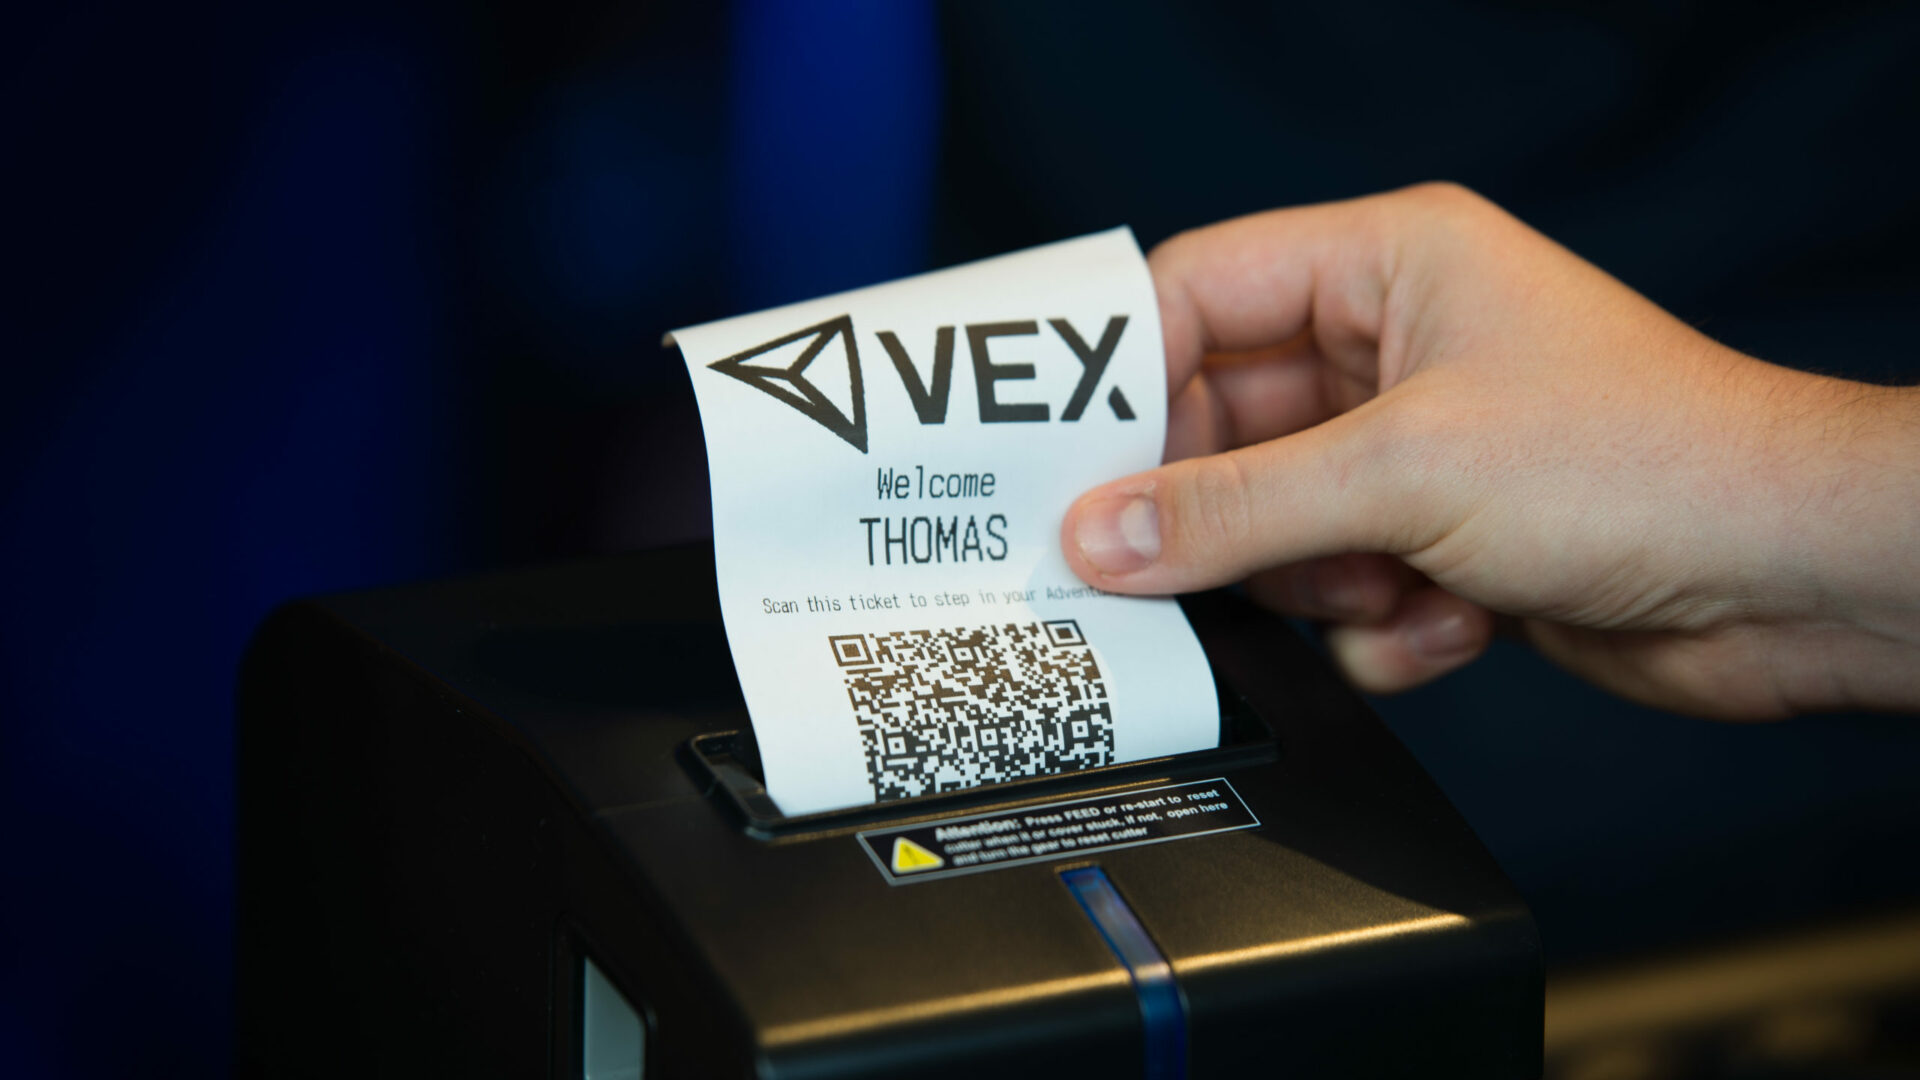 Easy-to-use ticket system to register and VEX eSports League